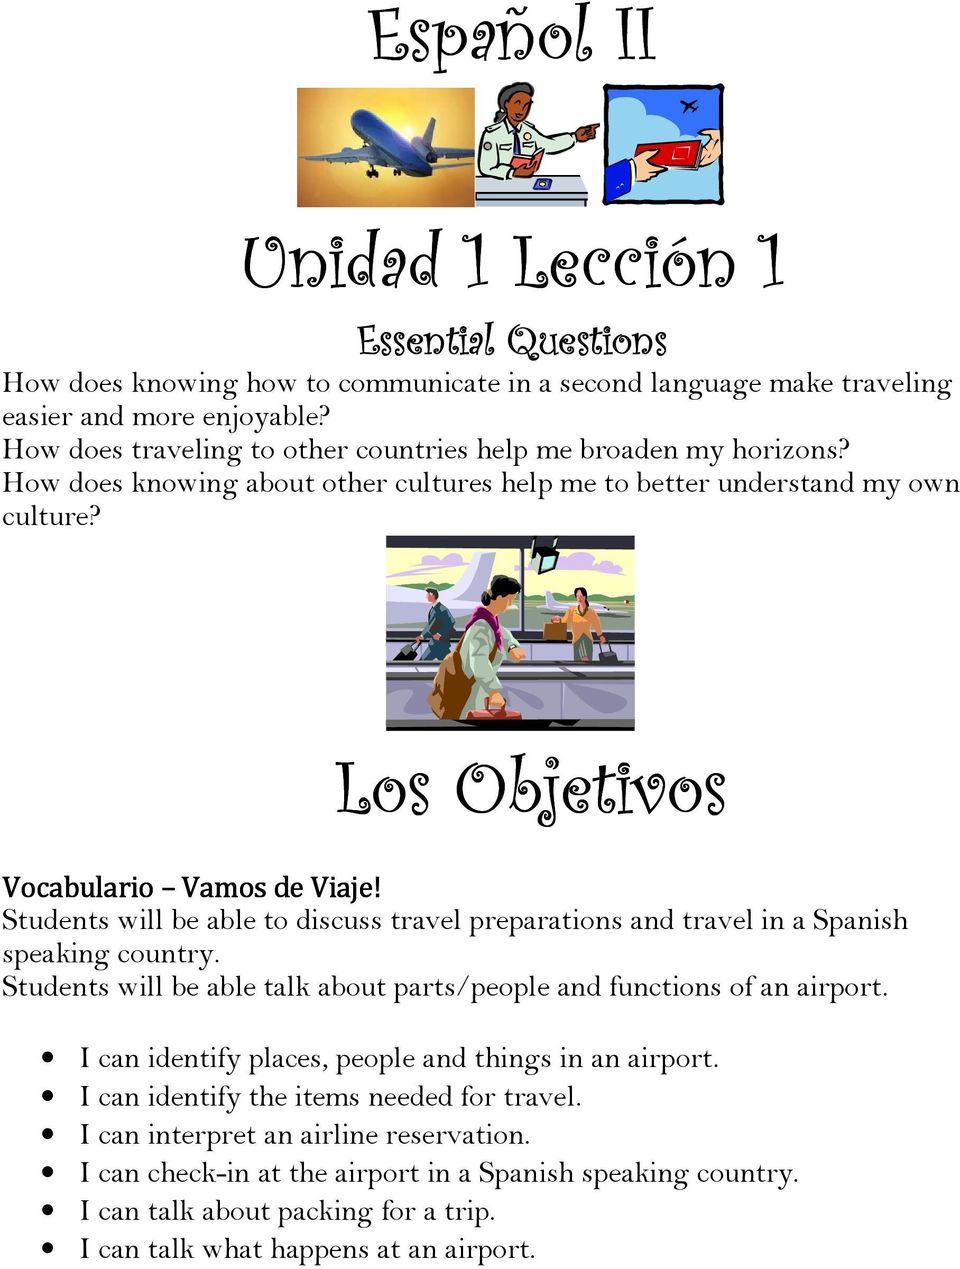 Students will be able to discuss travel preparations and travel in a Spanish speaking country. Students will be able talk about parts/people and functions of an airport.